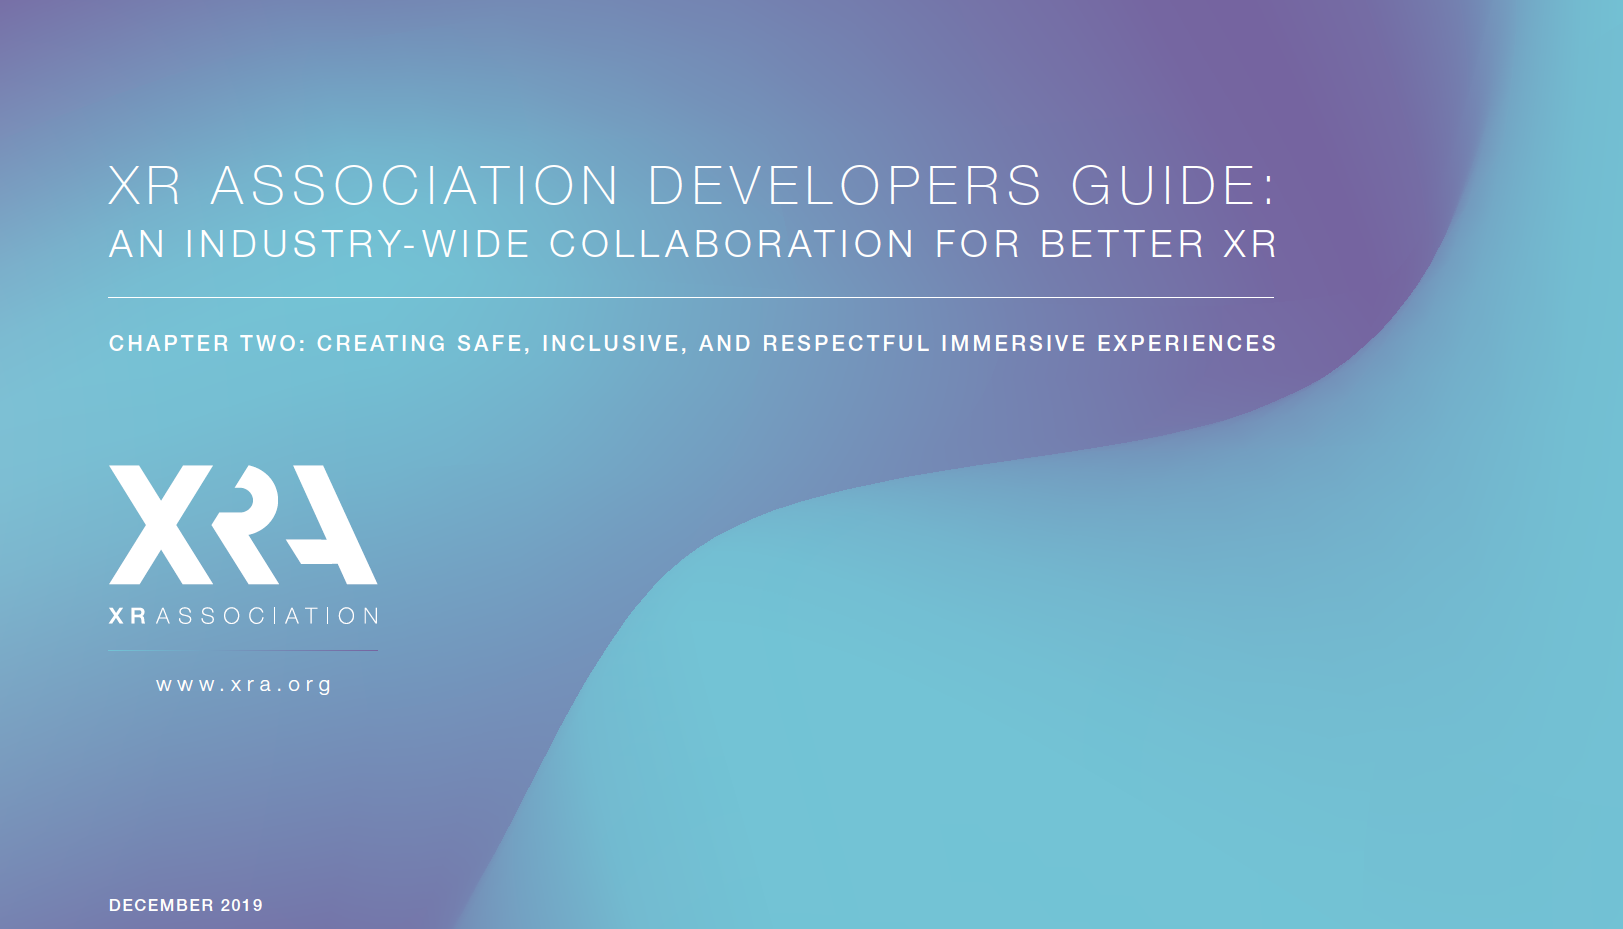 XRA’S DEVELOPERS GUIDE, CHAPTER TWO: Creating Safe, Inclusive, and Respectful Immersive Experiences